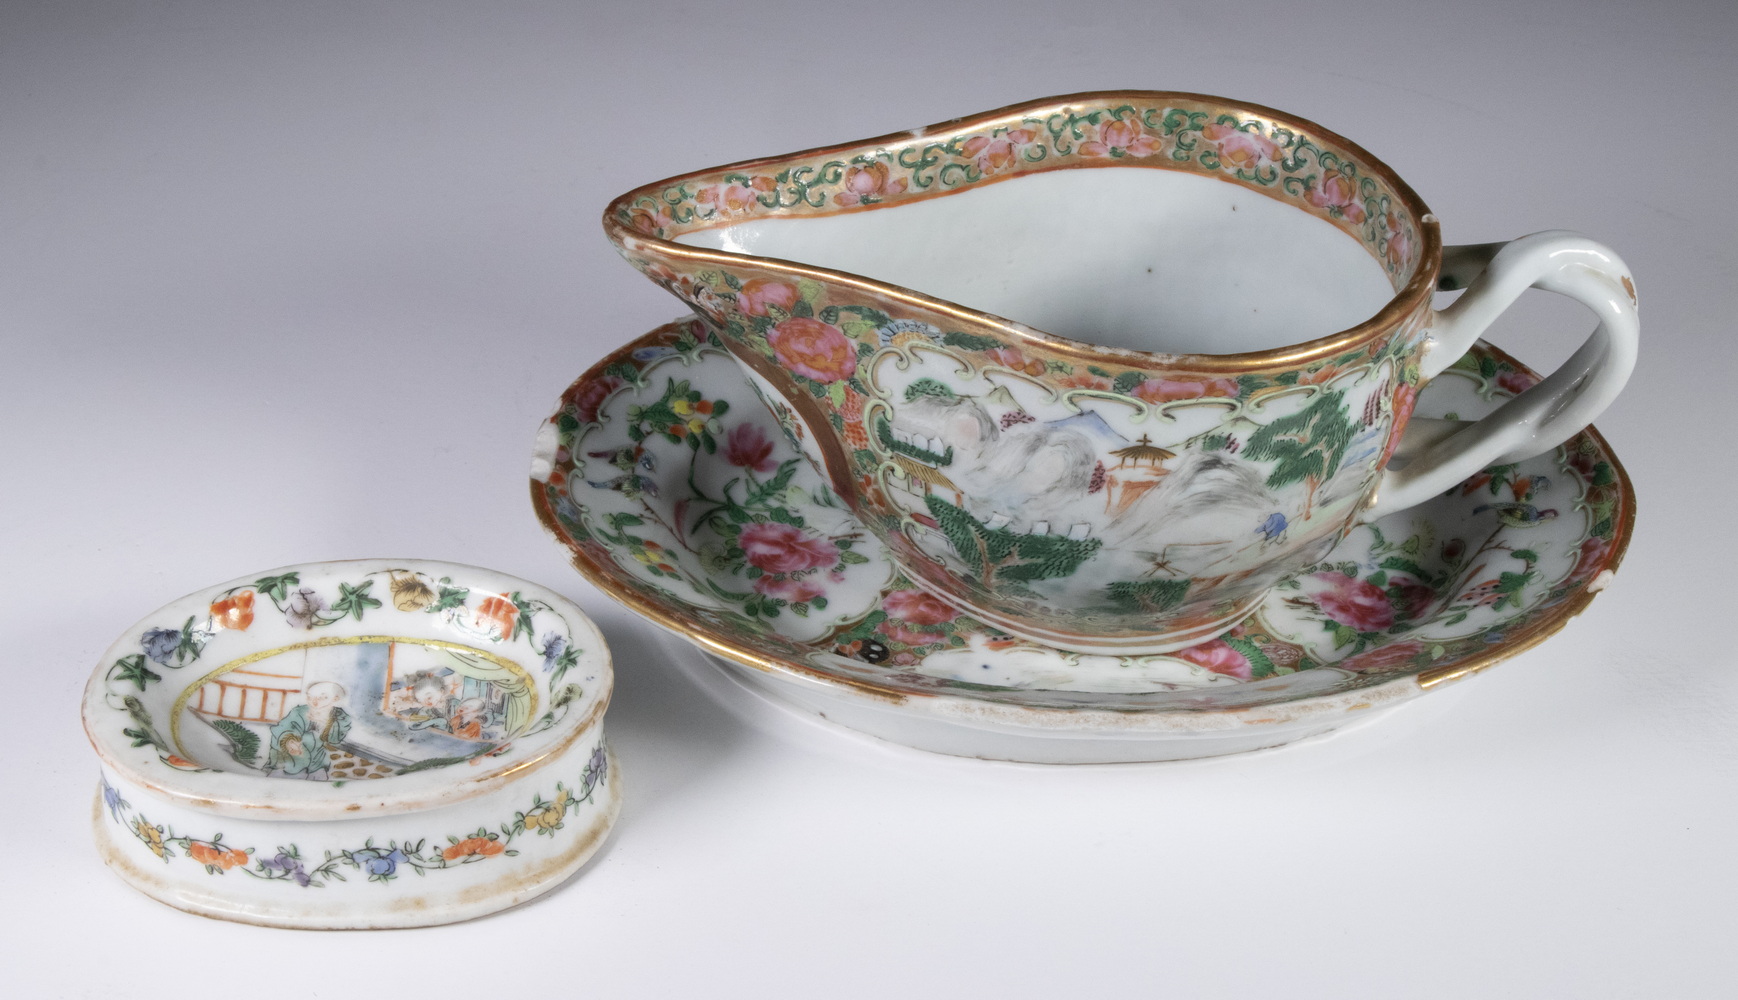 CHINESE EXPORT PORCELAIN SERVING